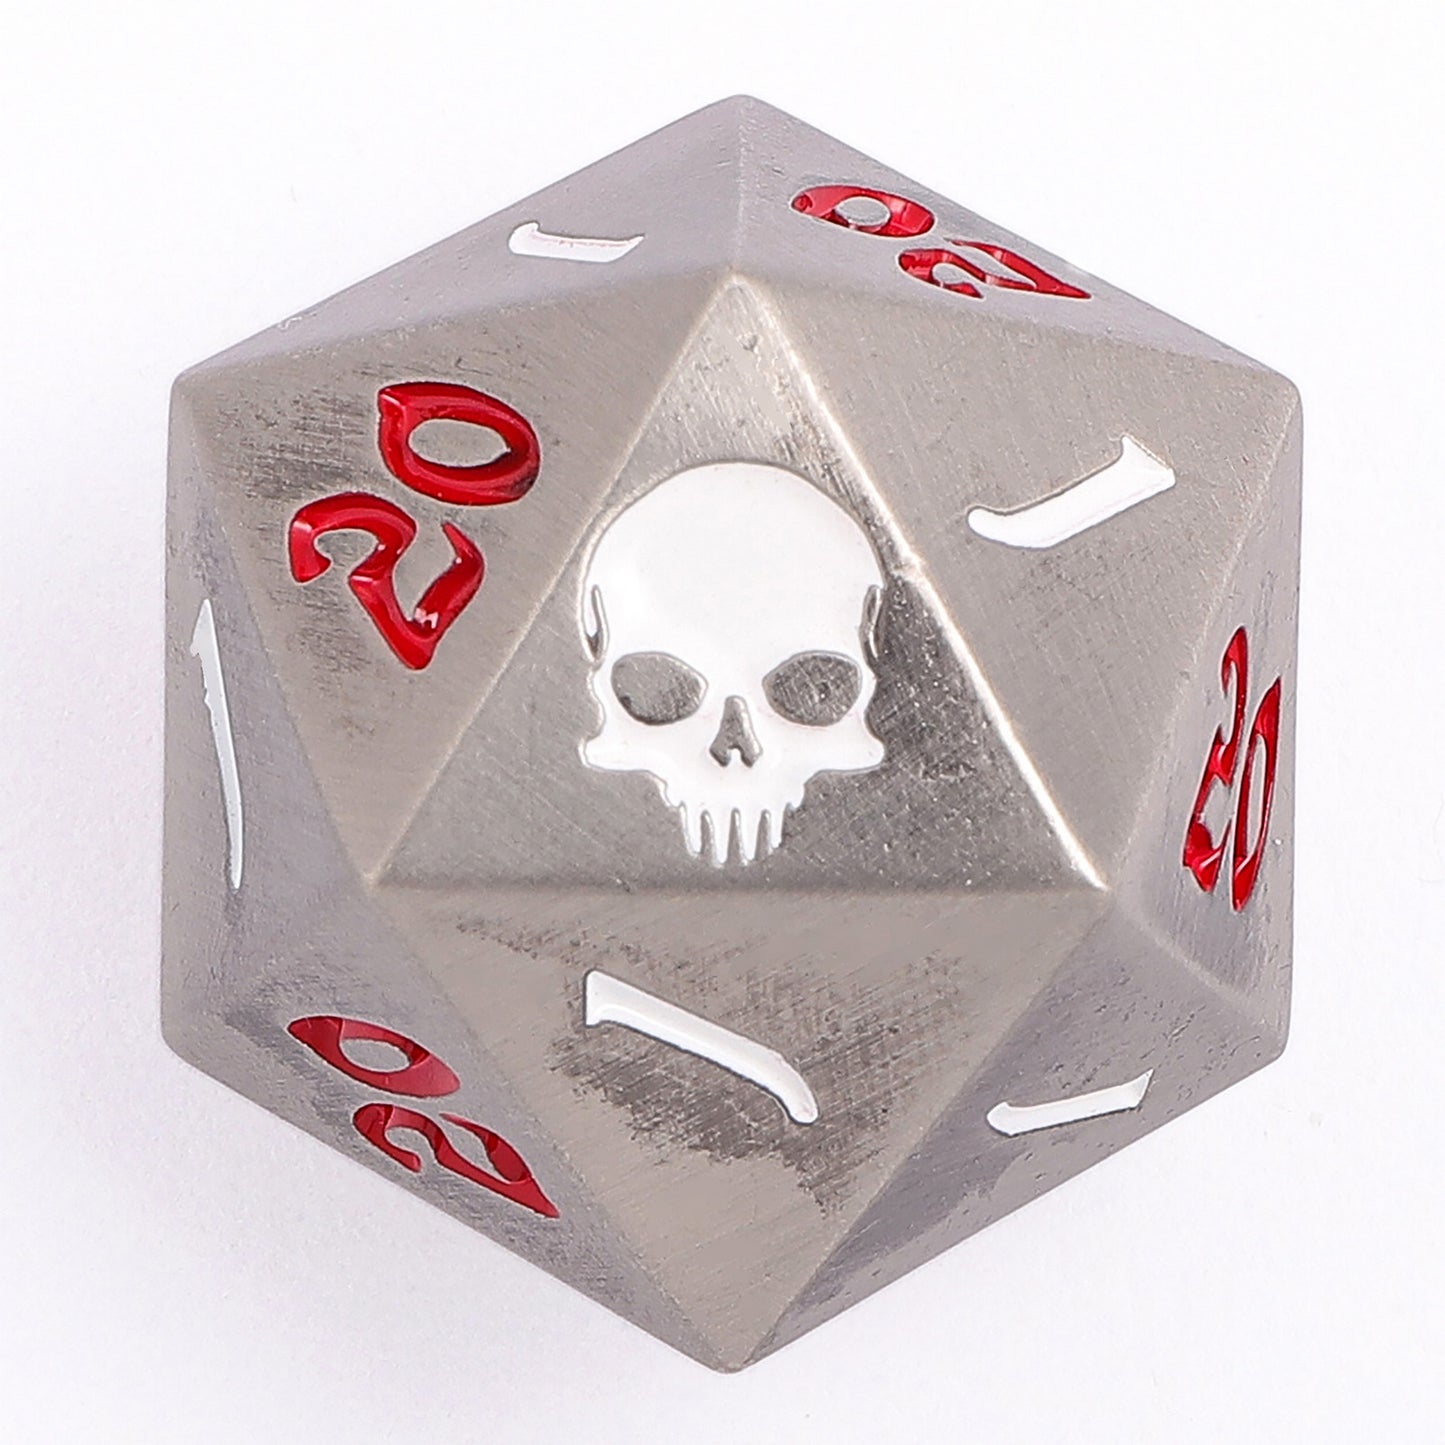 25mm Solid Metal Single D20 The Critical Dice -Ancient Silver